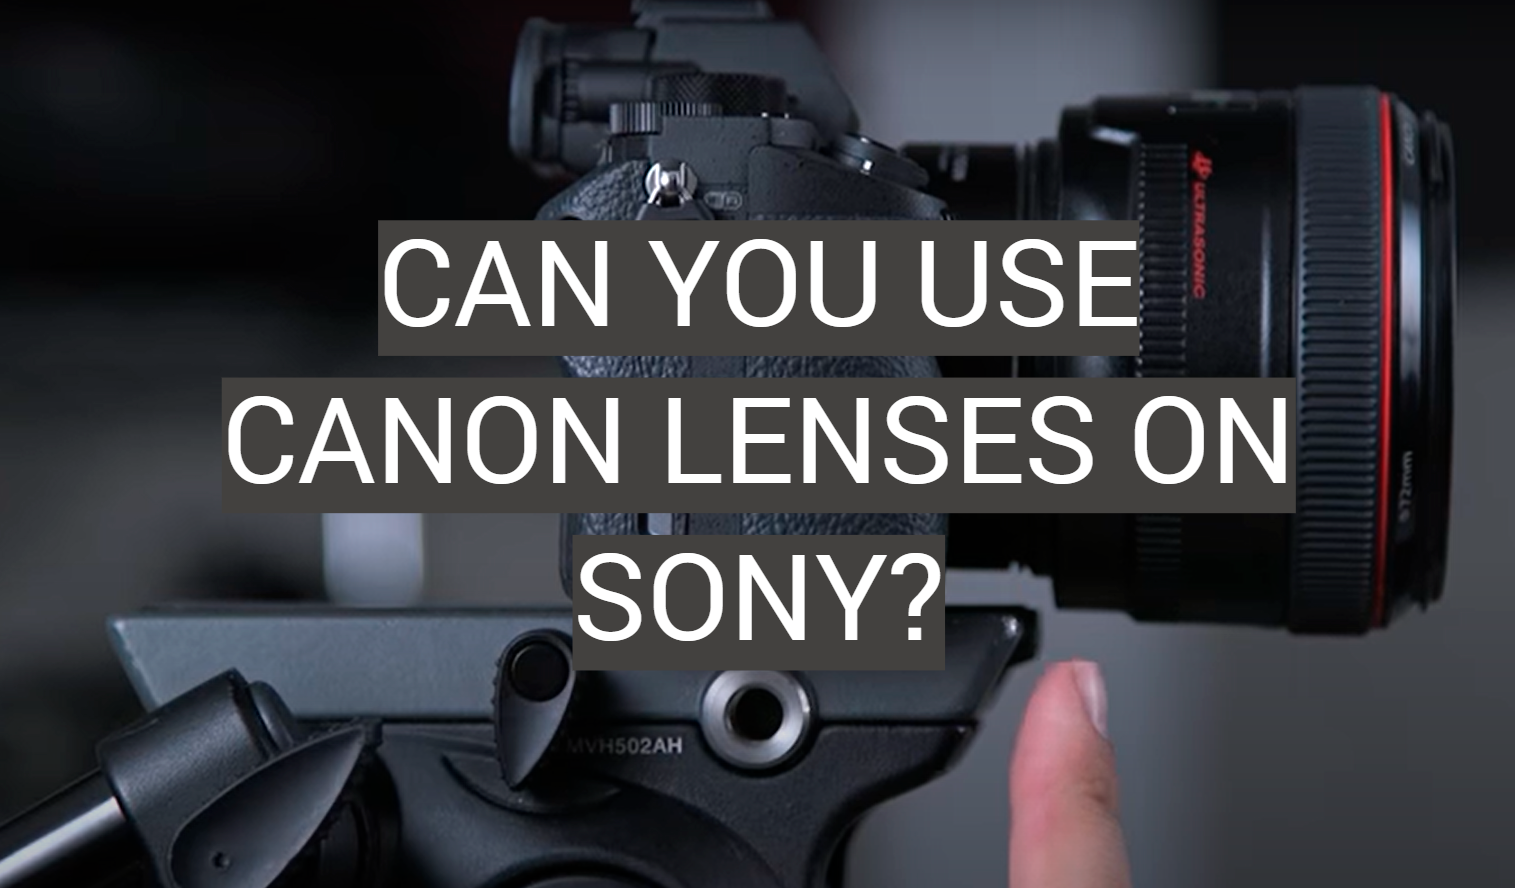 Can You Use Canon Lenses on Sony?